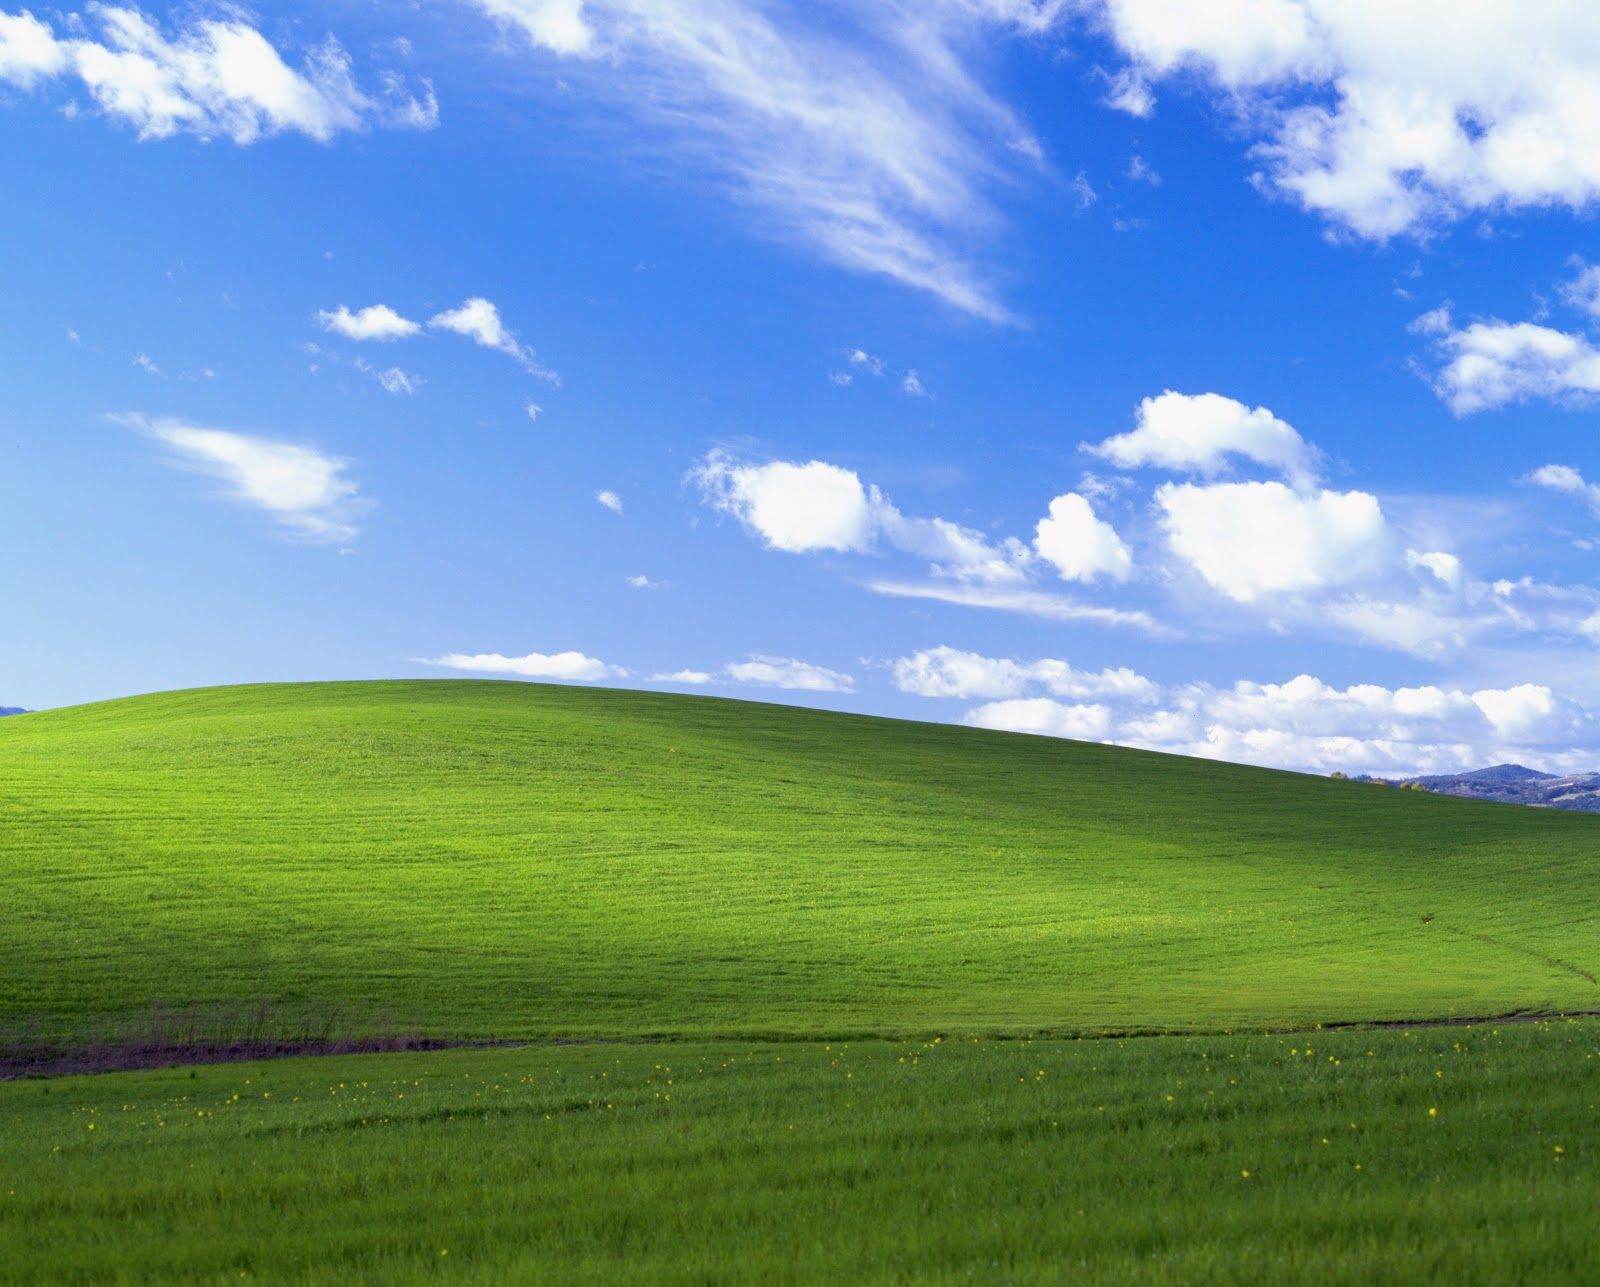 Old Windows Wallpaper Free Old Windows Background